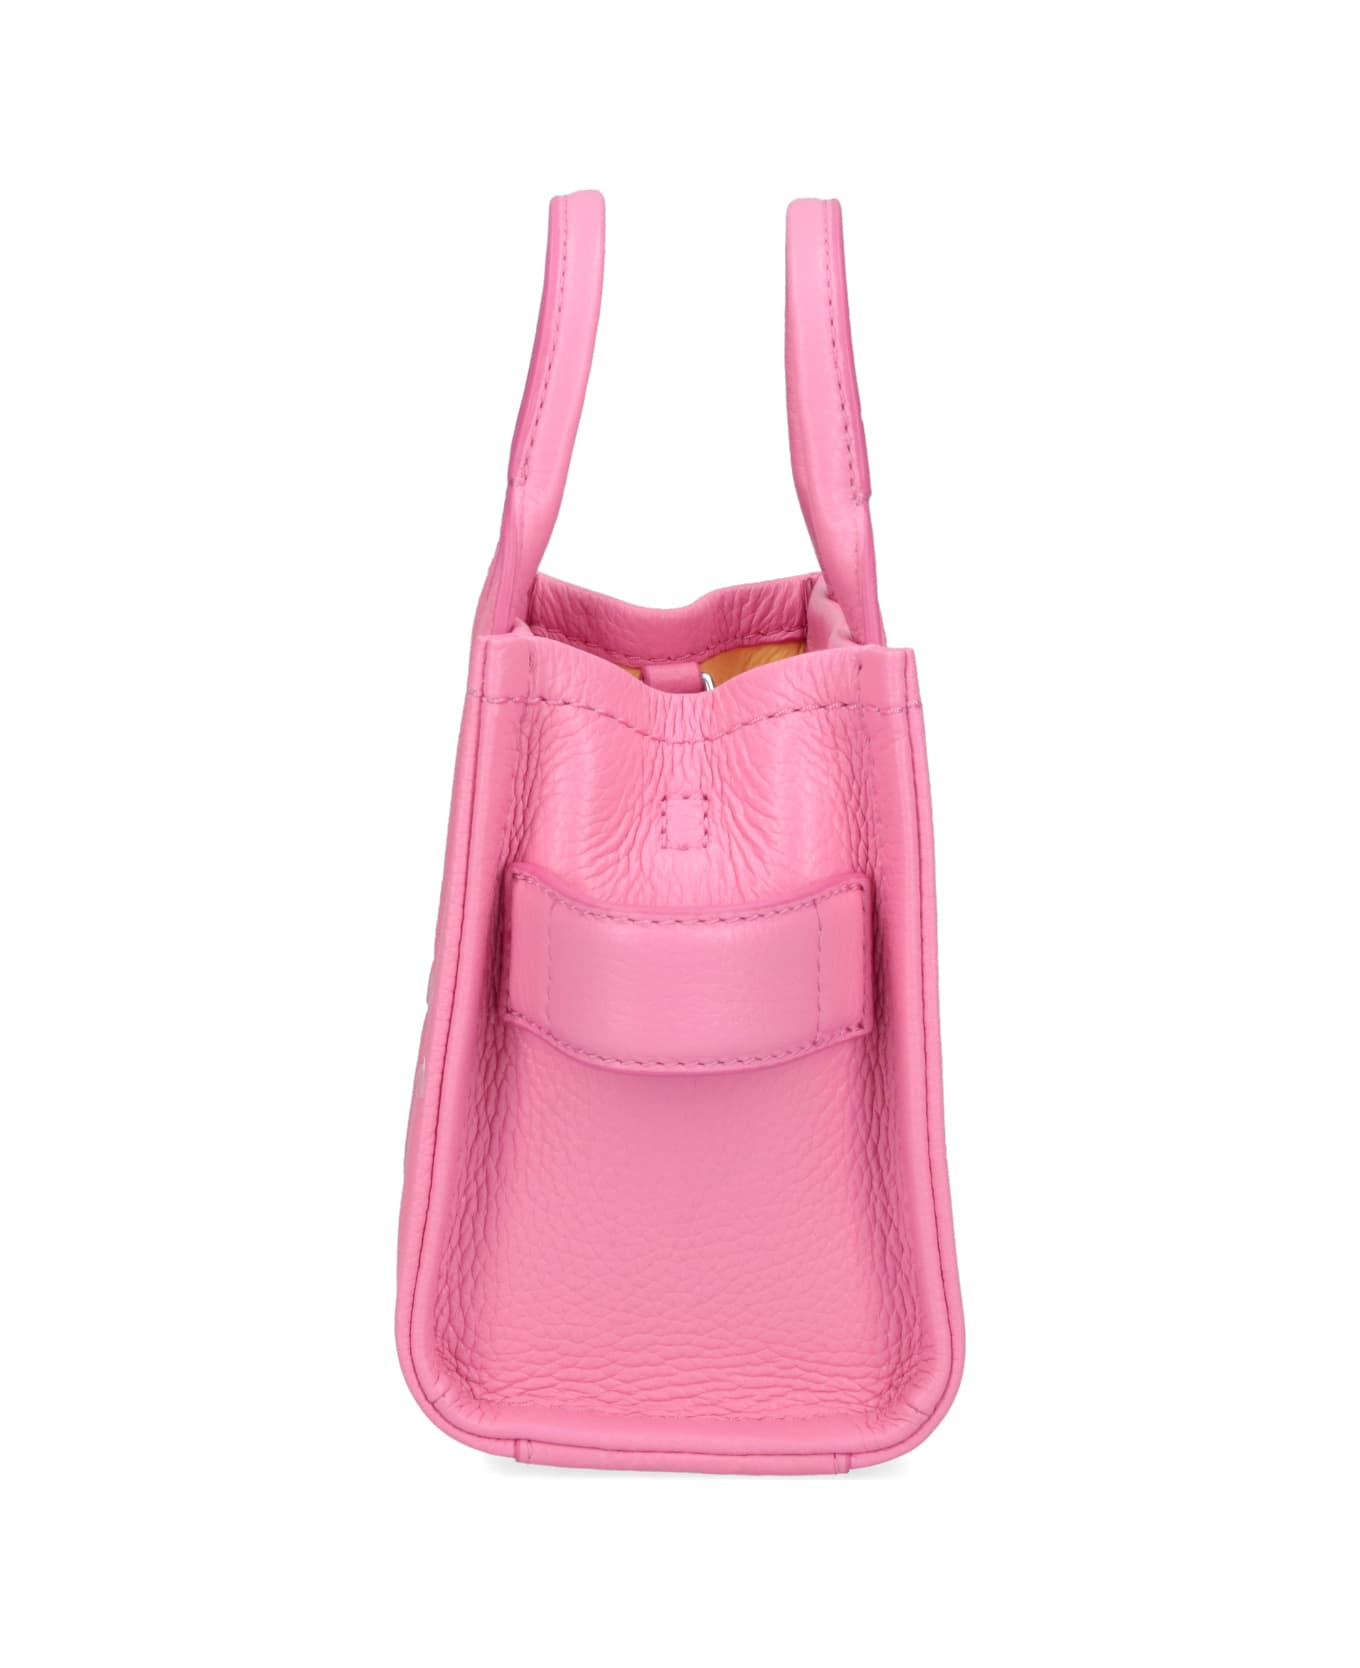 Marc Jacobs Crossbody Tote Bag - Pink